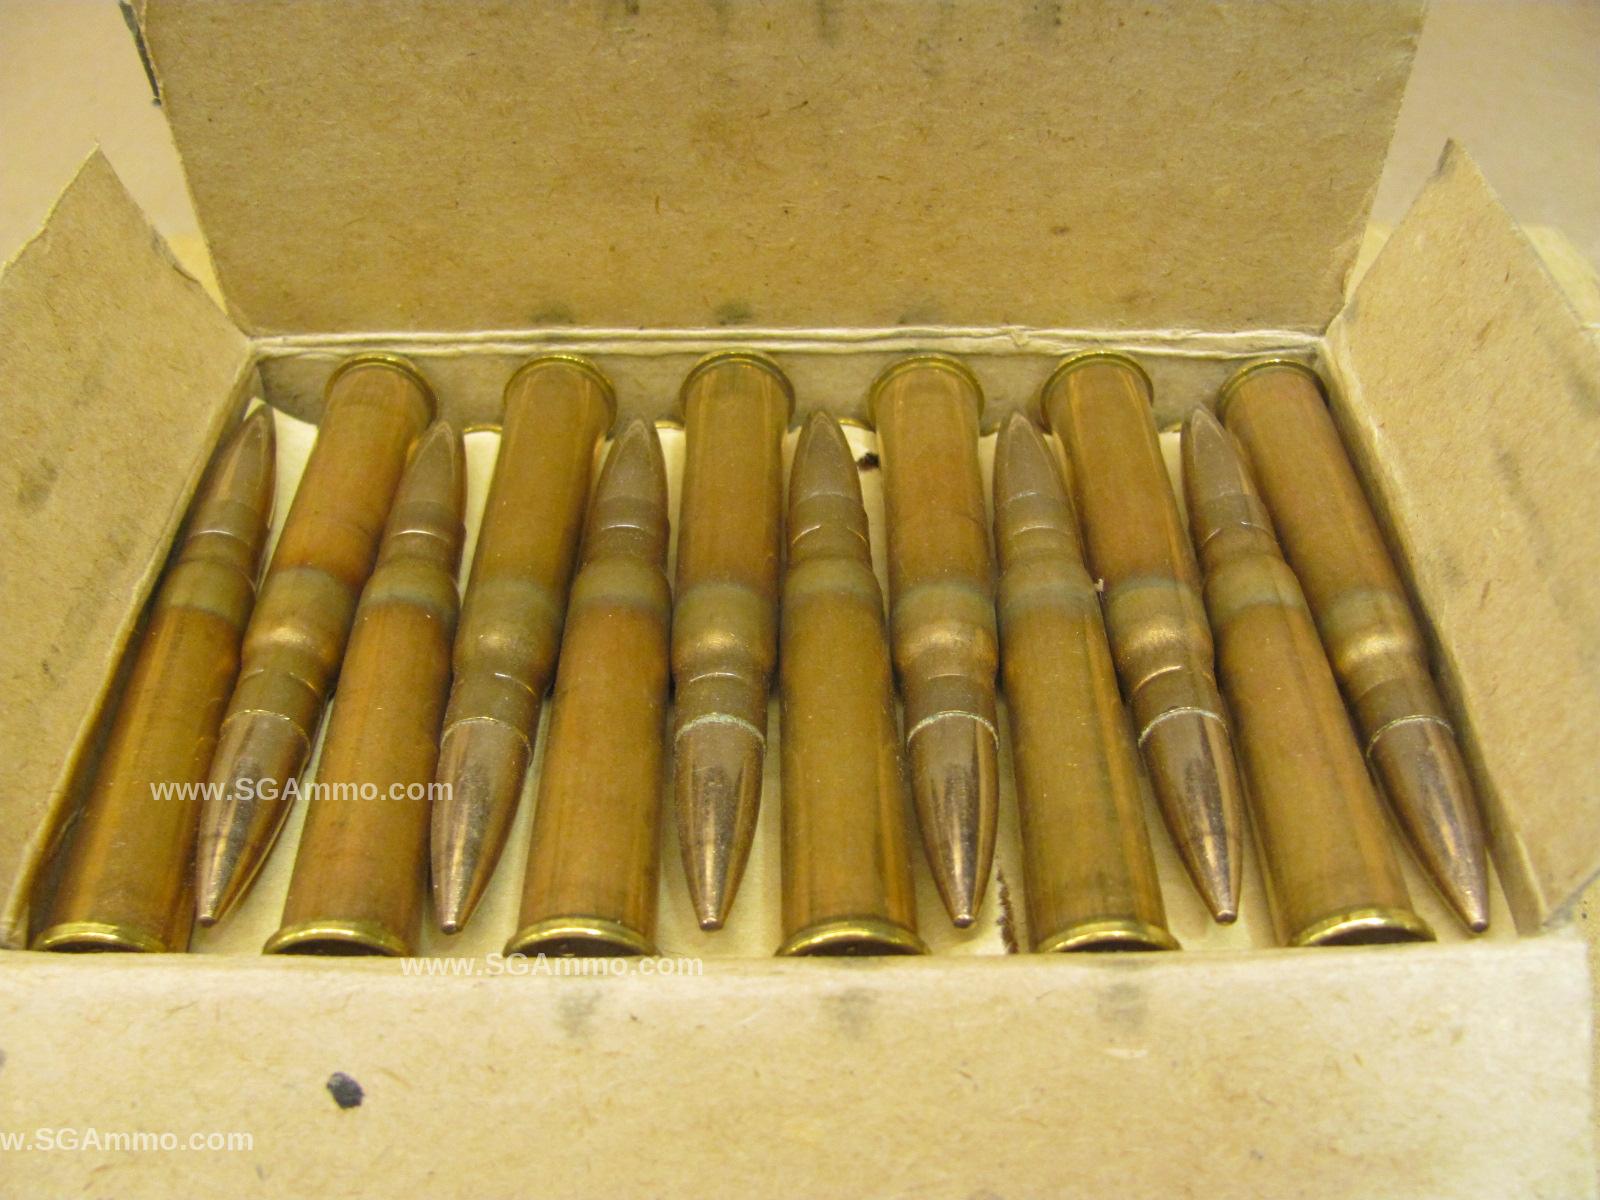 288 Round Can - 303 British MK VIIZ Type Ball Ammo Canadian WW2 Era Surplus Ammo Packed in M19A1 Canister - Sold AS-IS - For Collectors